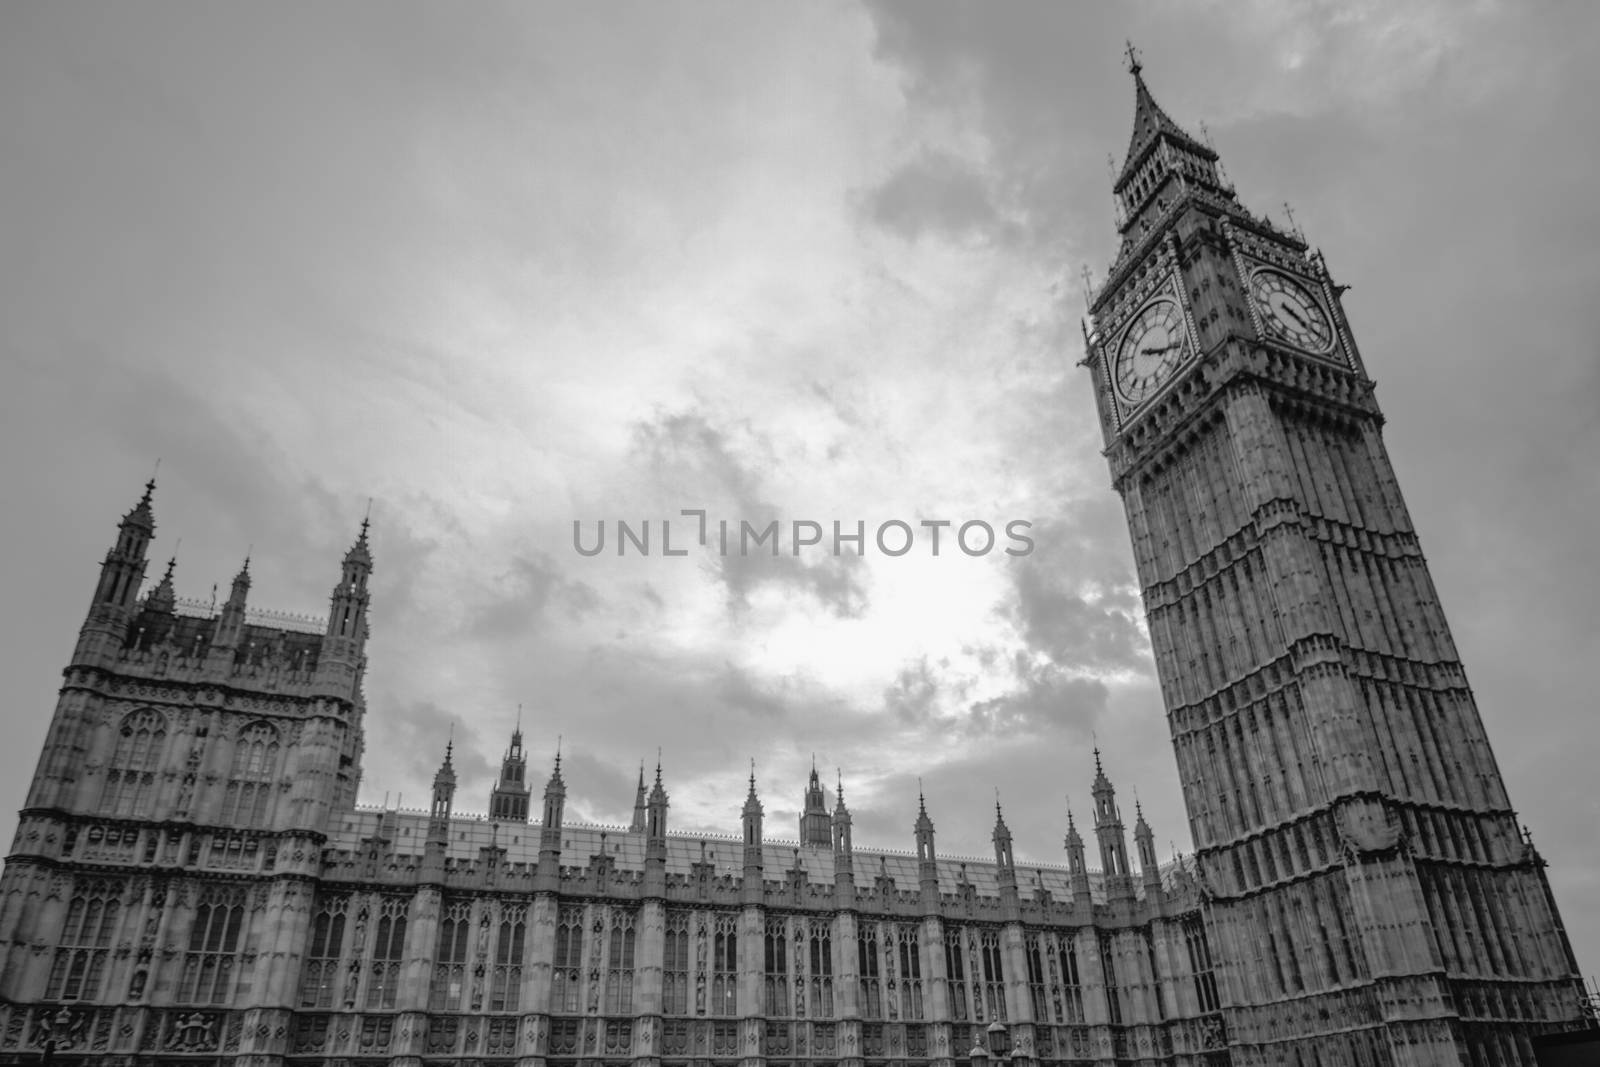 The houses of Parliament and Big Ben in London